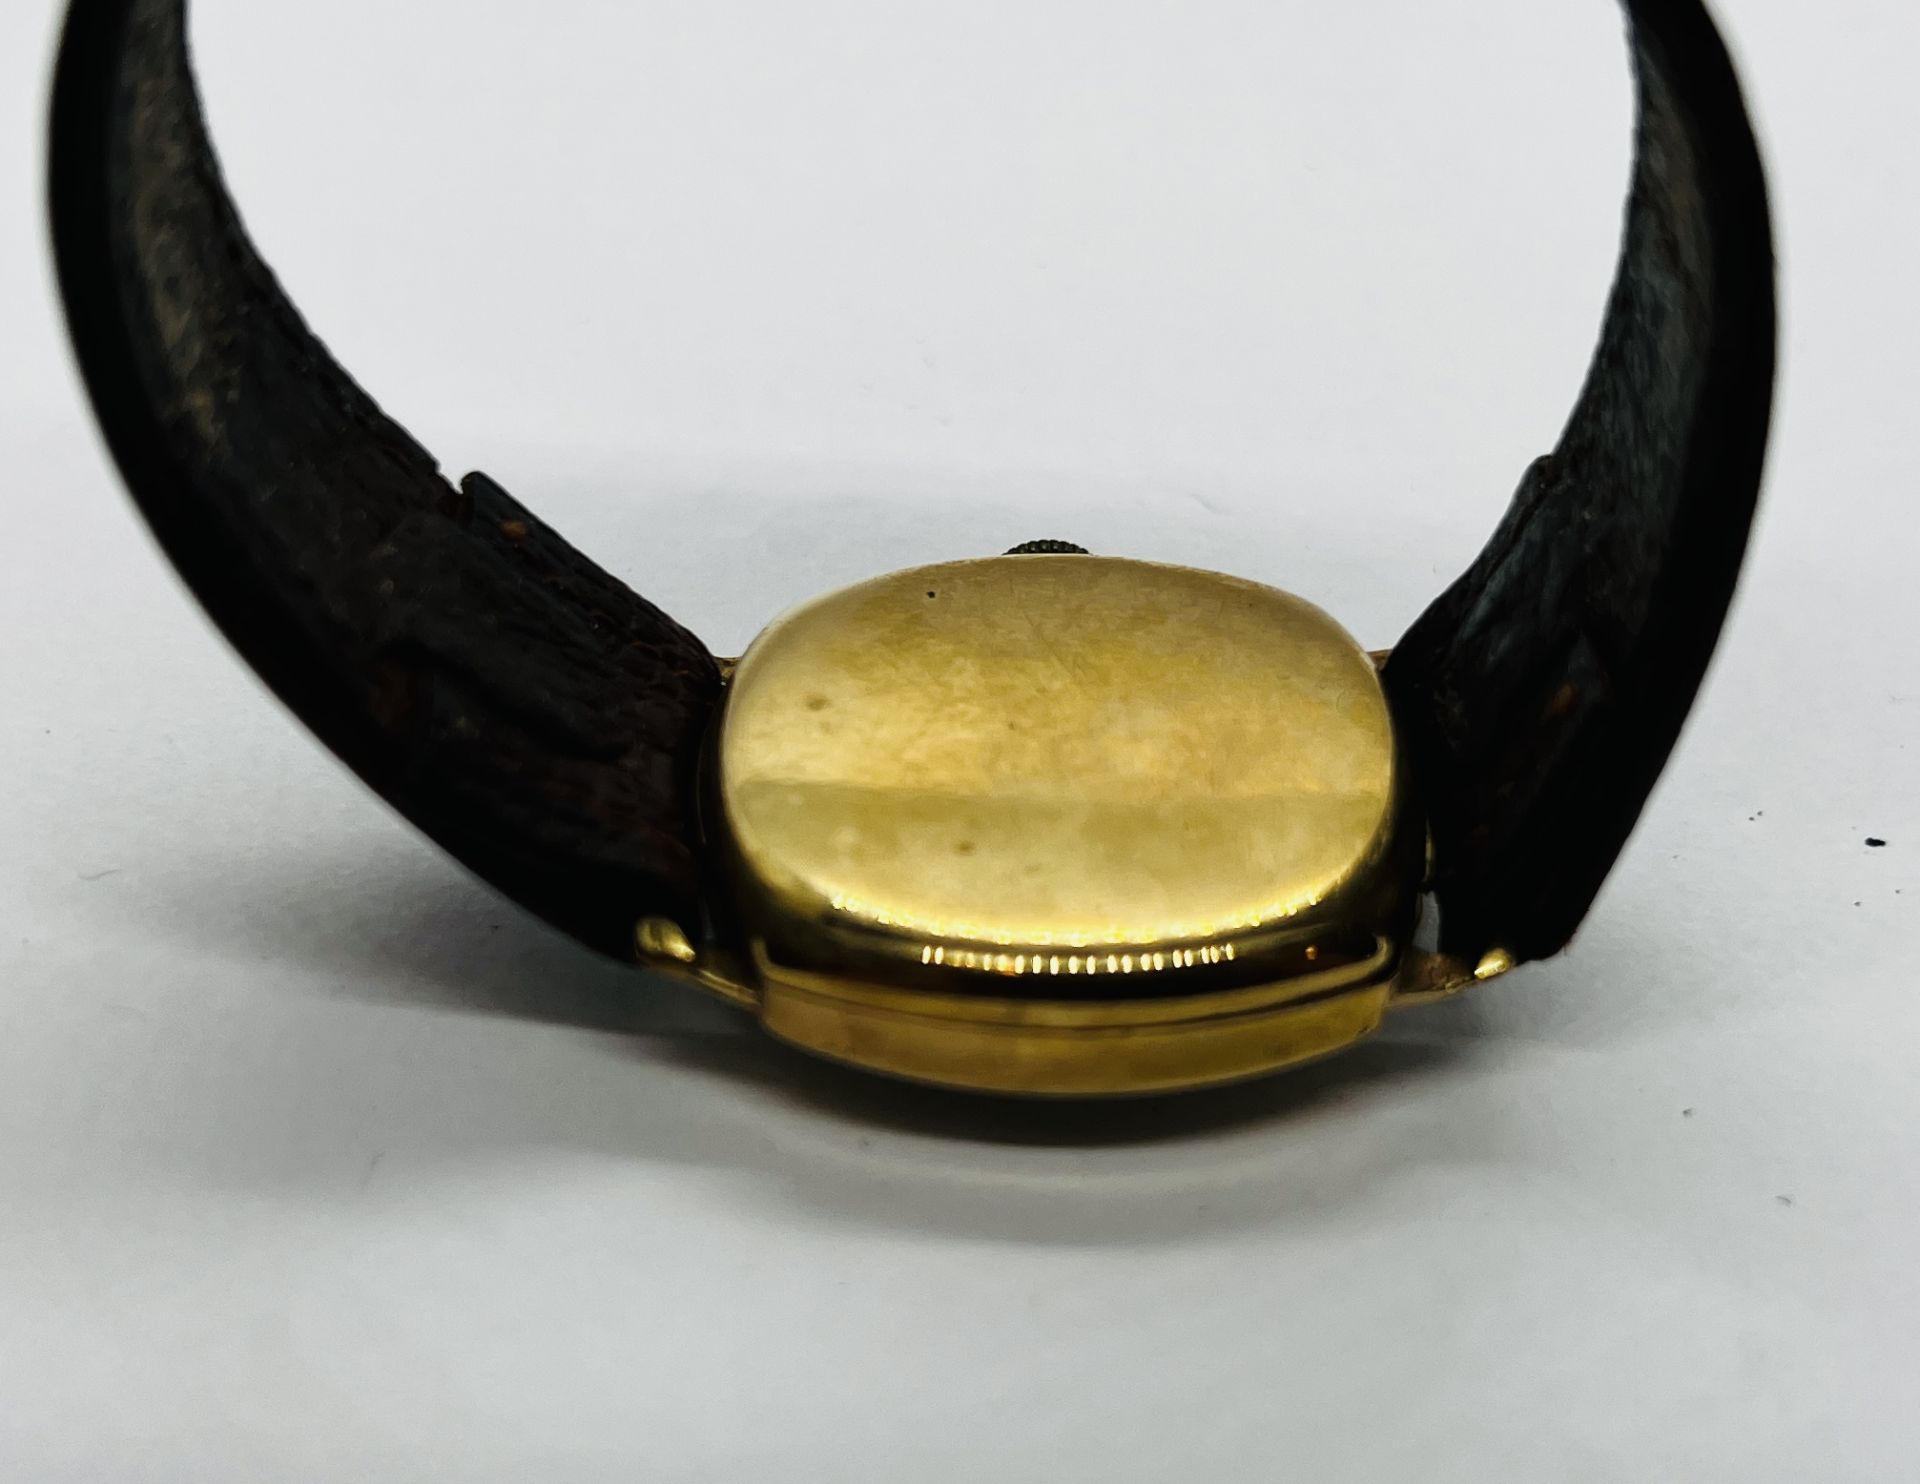 A VINTAGE 9CT GOLD CASED WRIST WATCH MARKED HERBERT ....... LTD MAGNO LUX ON A BROWN LEATHER STRAP. - Image 3 of 7